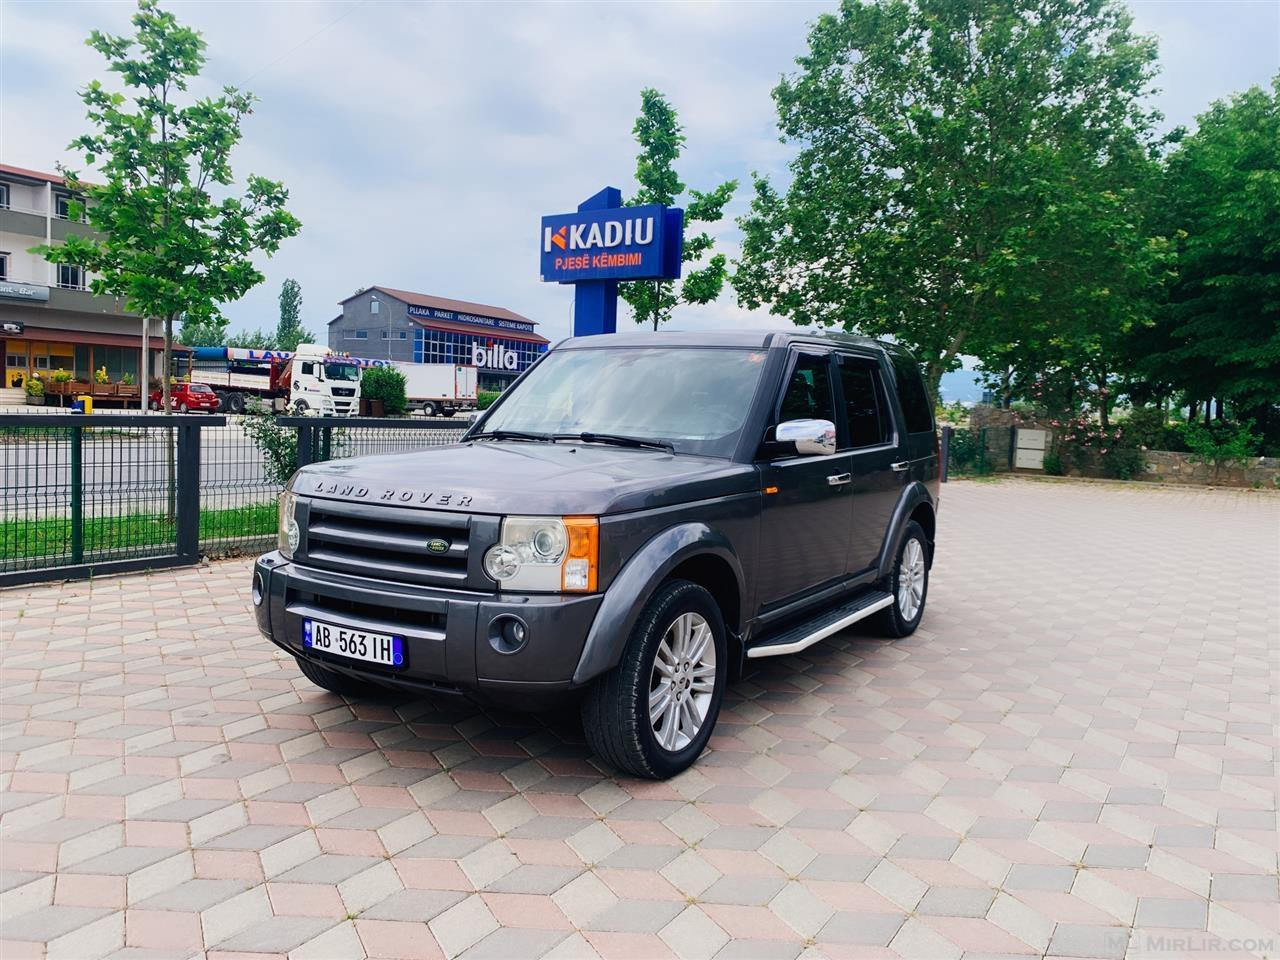 LAND ROVER DISCOVERY3 2.7 naft MUNDESI NDERRIMI